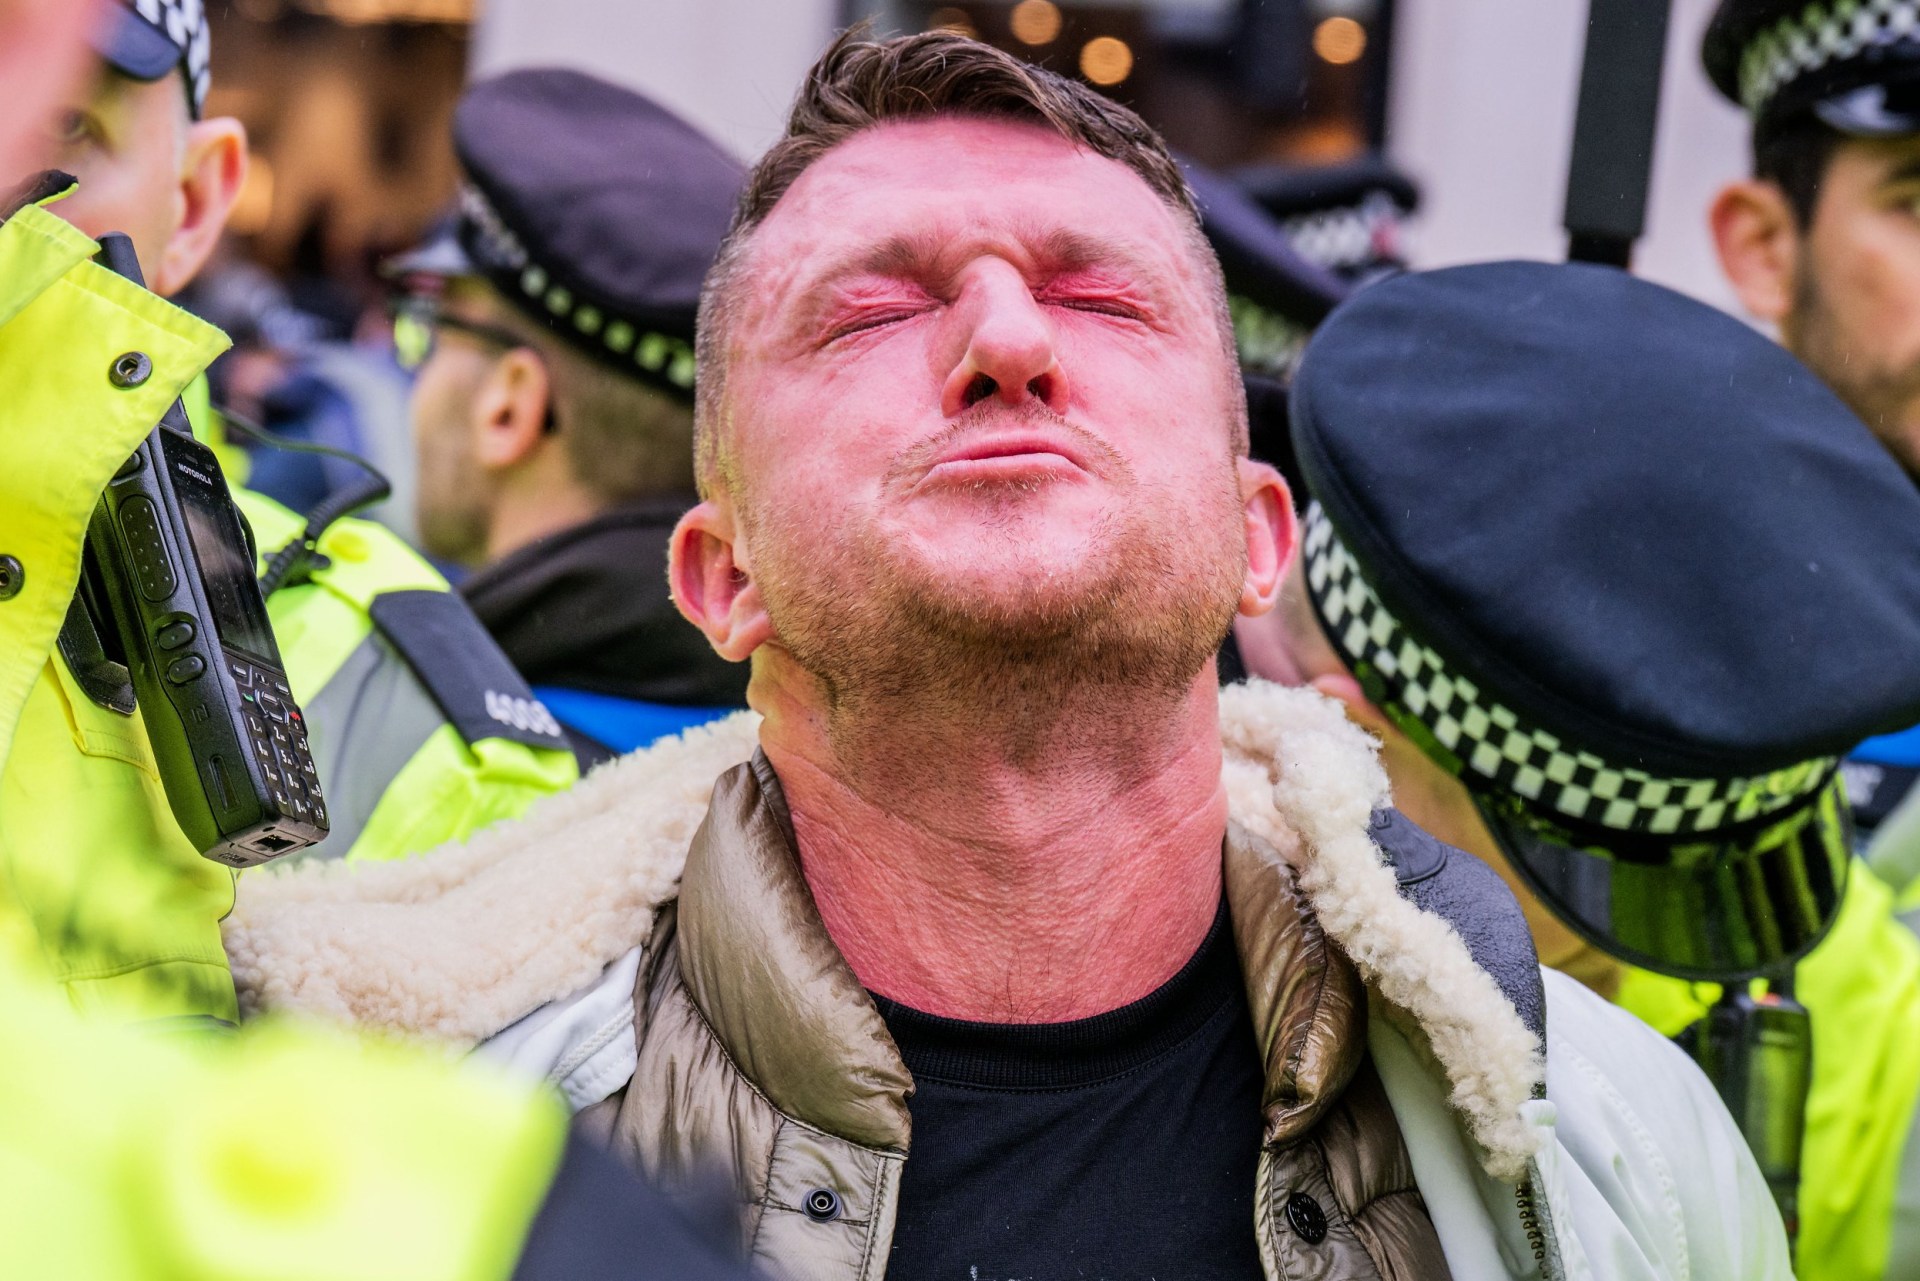 tommy robinson's face is a picture after he's pepper sprayed at antisemitism rally